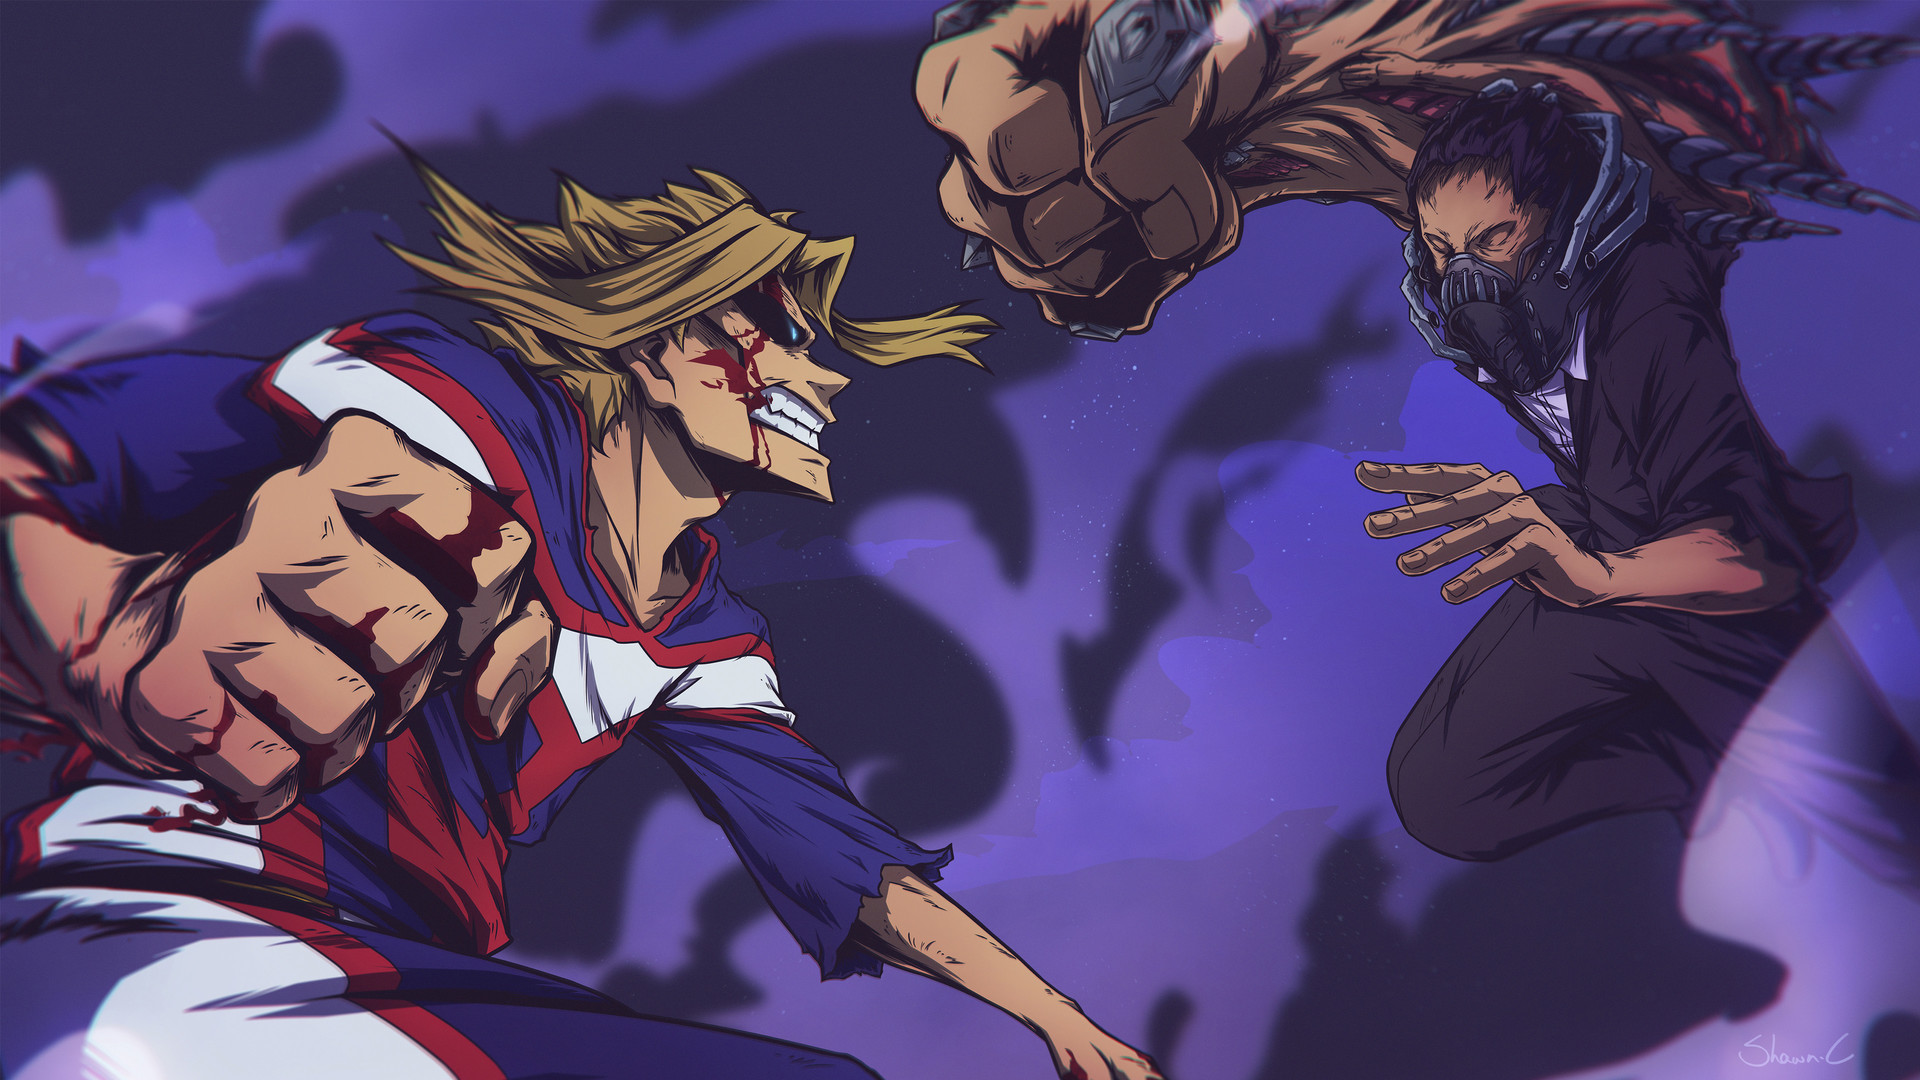 ArtStation - All Might vs All For One